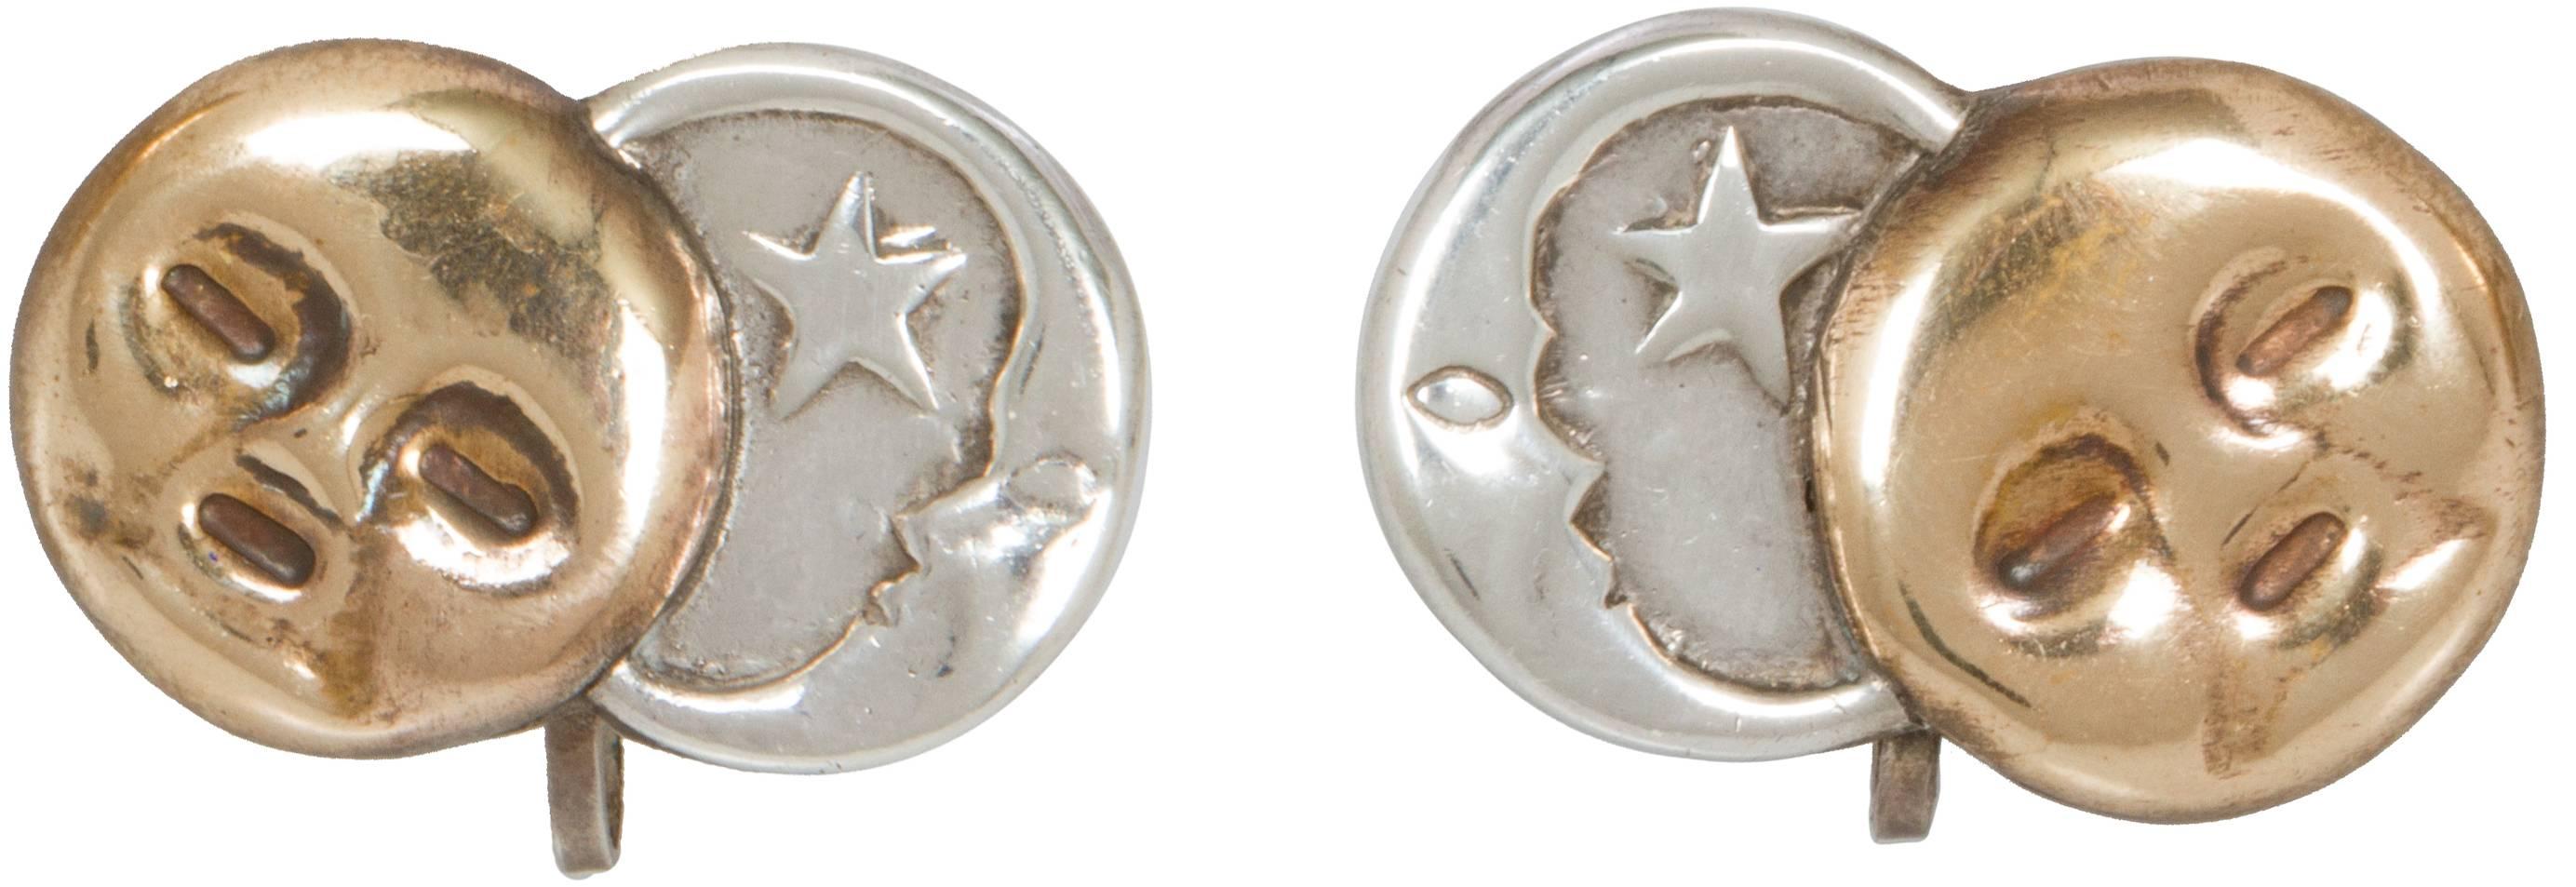 These are the charming and iconic Spratling Sun and Moon earrings.